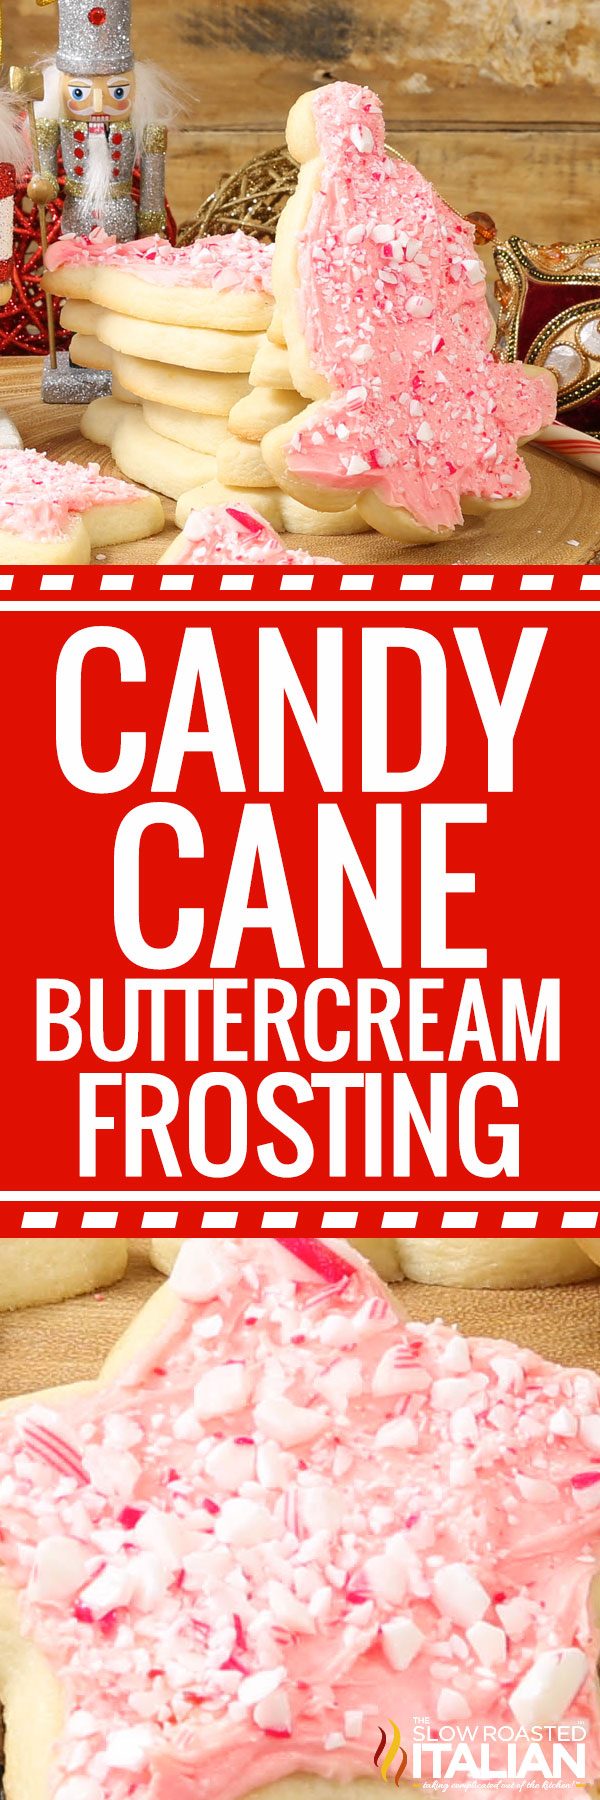 candy-cane-buttercream-frosting-pin-3976369